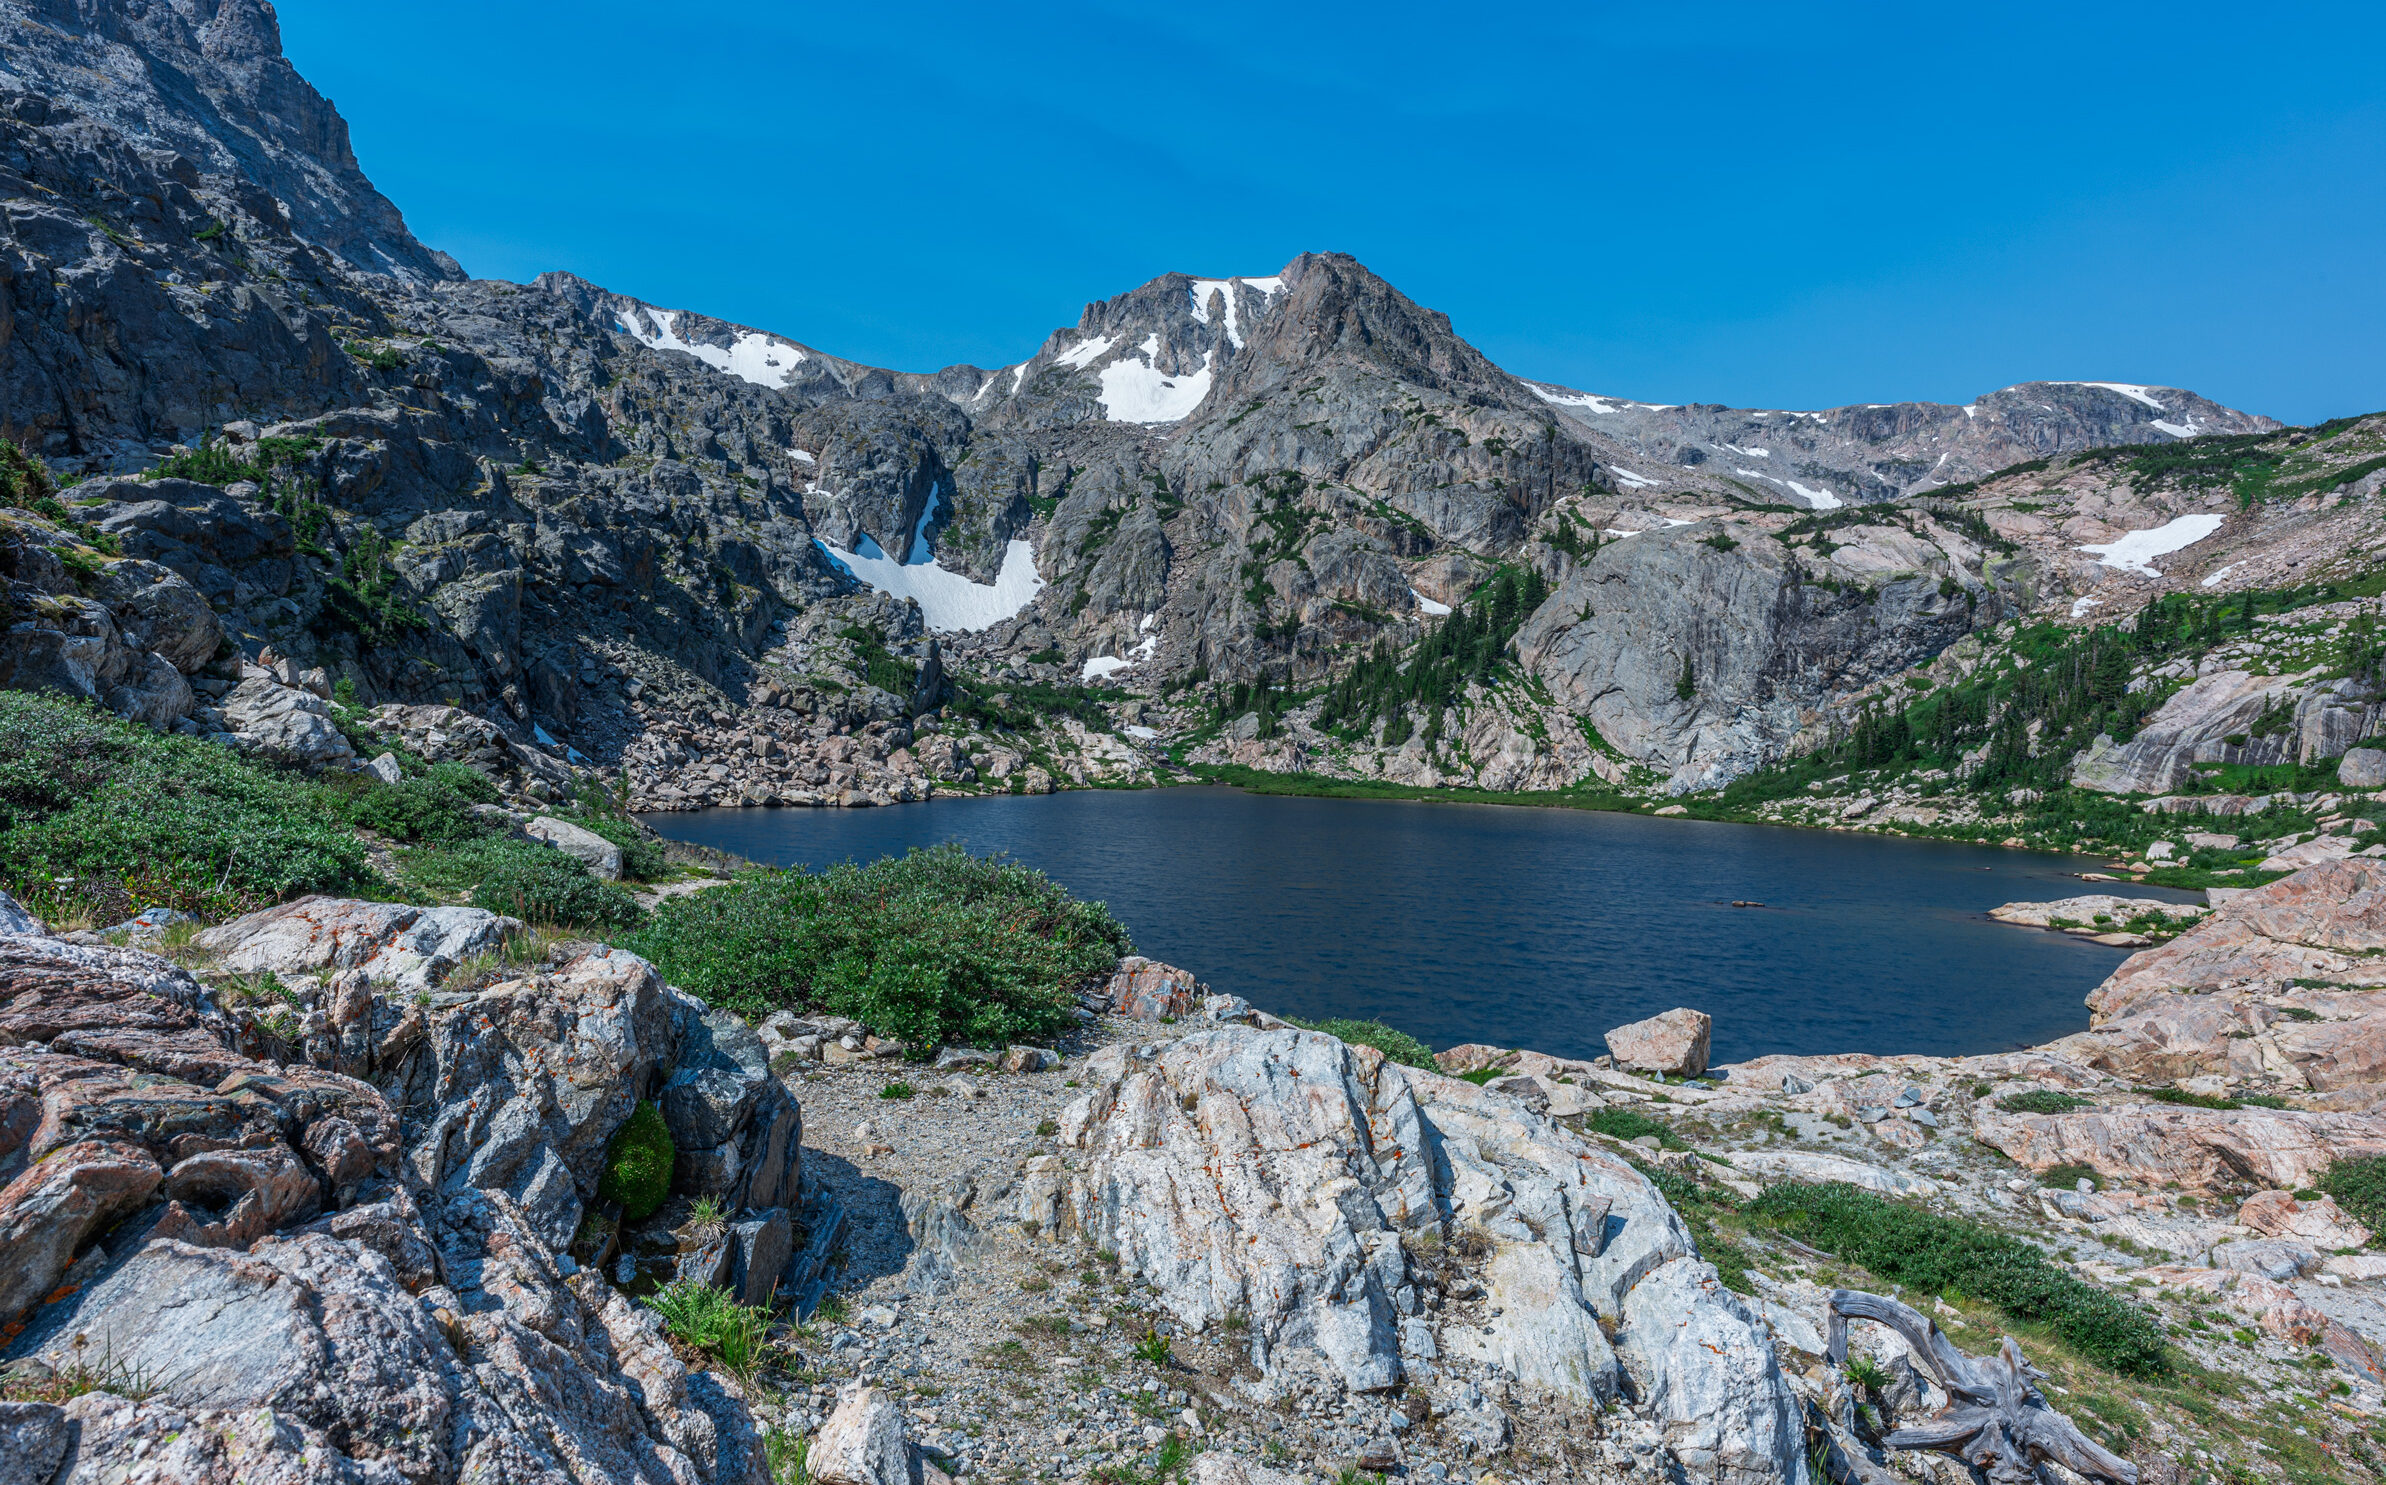 Bluebird Lake with Ouzel Peak in the background, clear skies, summer time